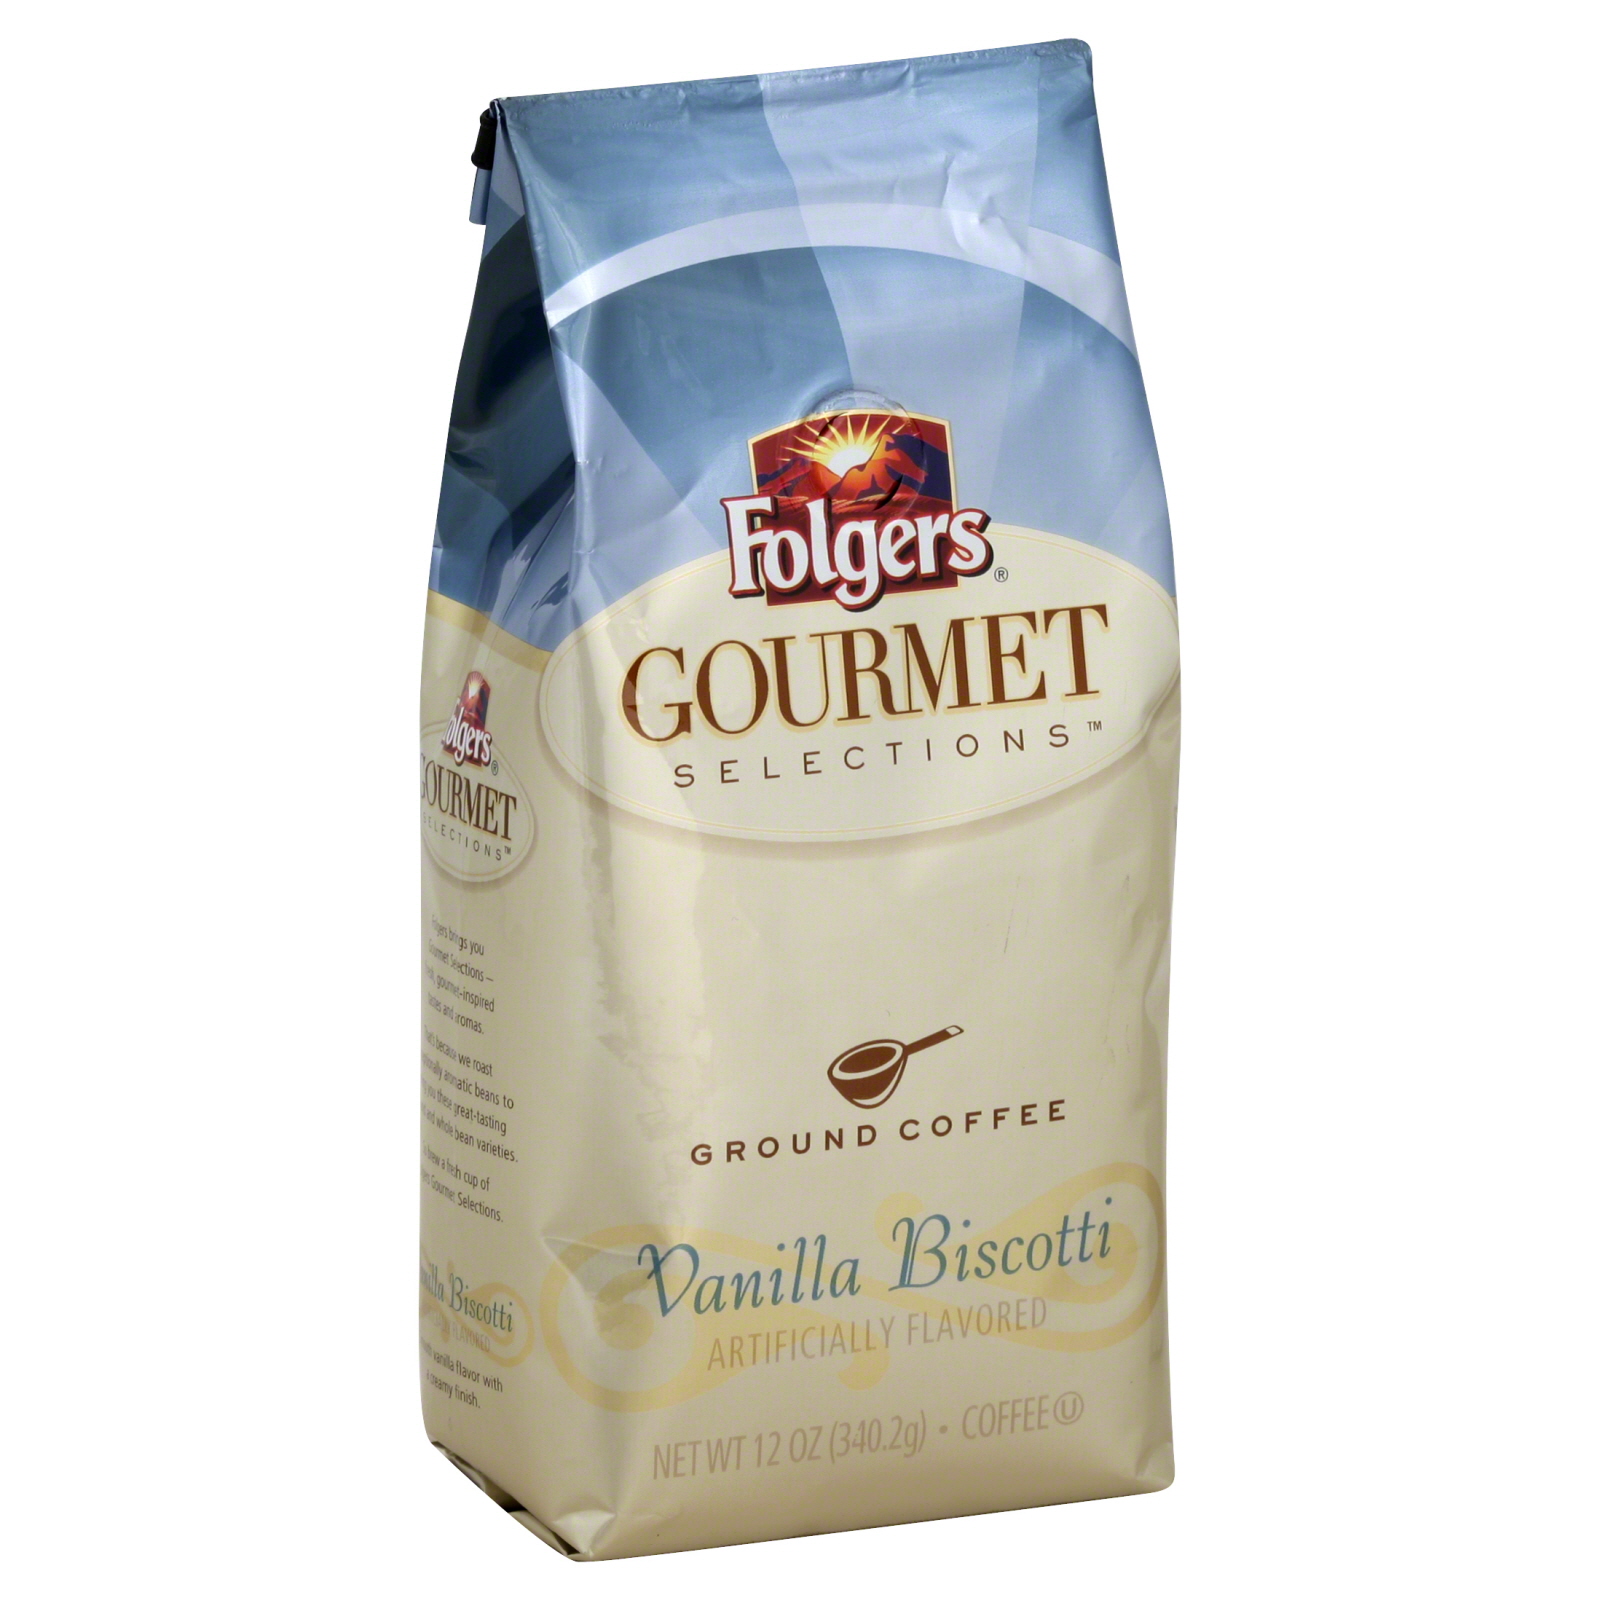 Folgers Gourmet Selections Coffee, Ground, Vanilla Biscotti, 12 oz (340.2 g)